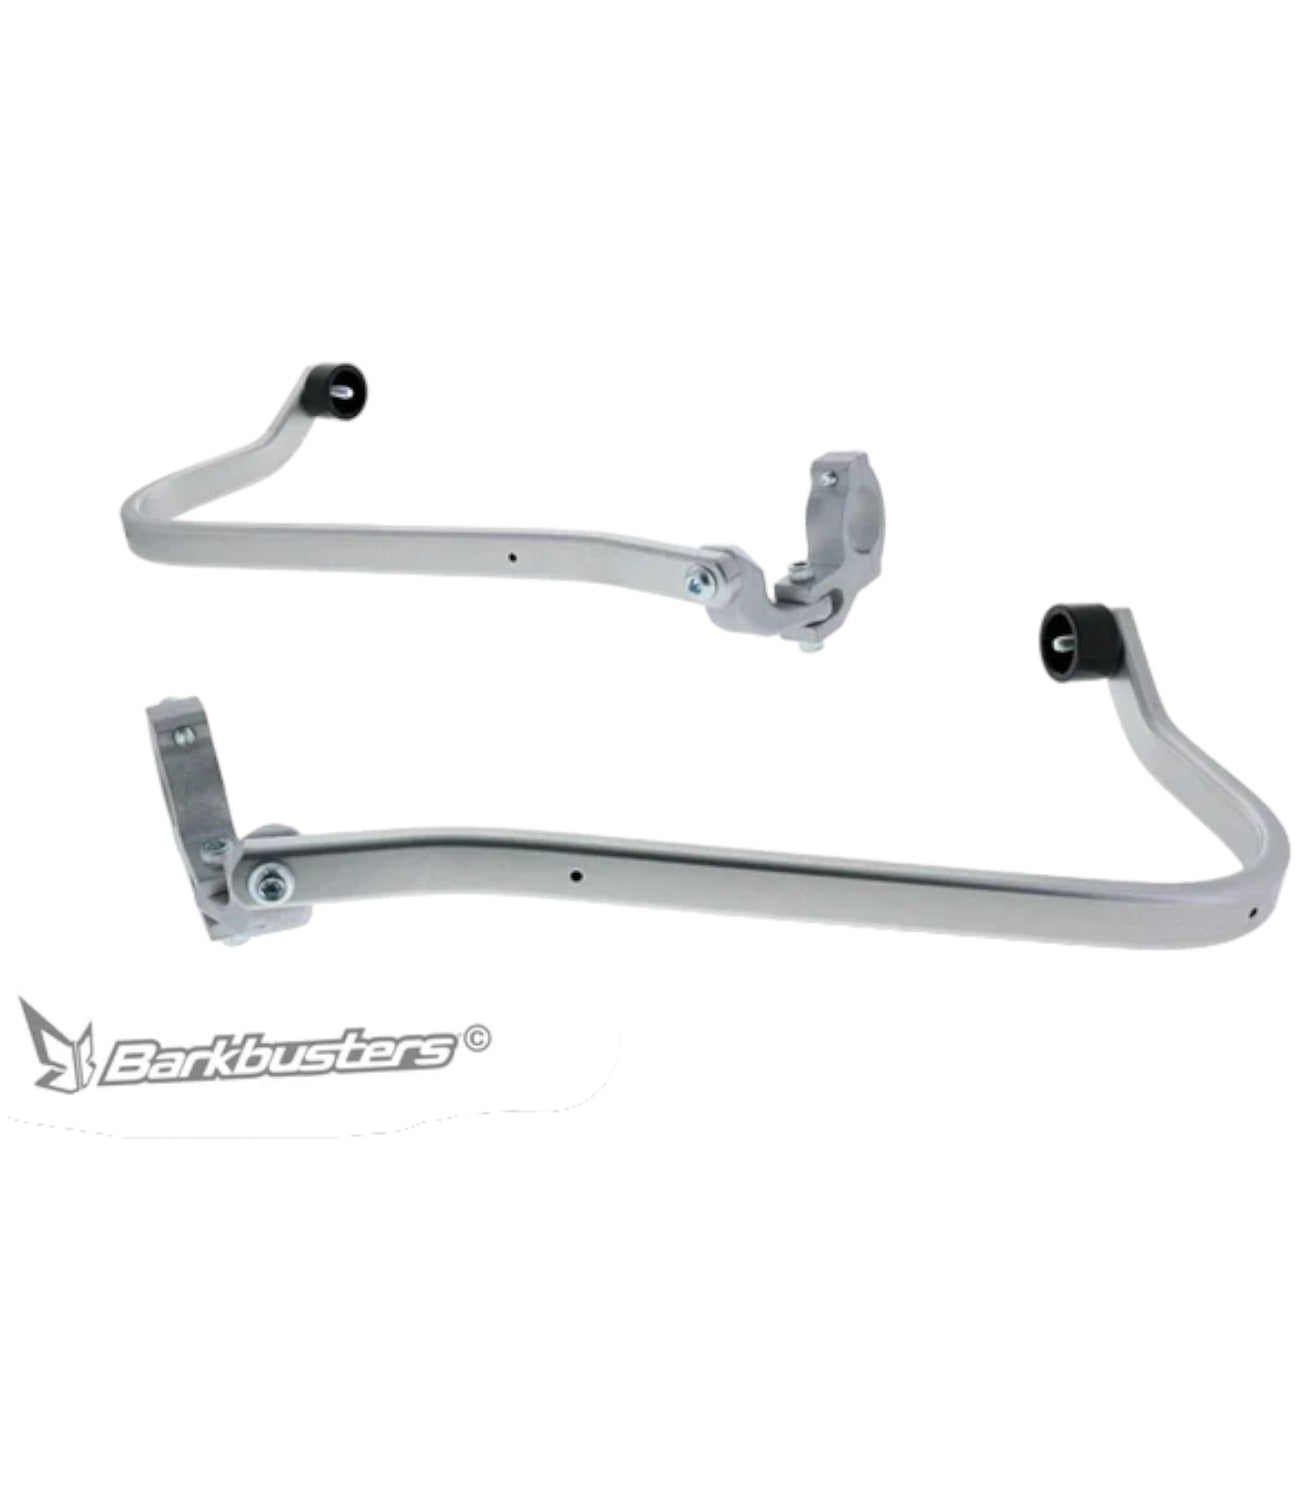 Barkbusters - Two Point Handguard Hardware Mount For Triumph Tiger 660 Sport